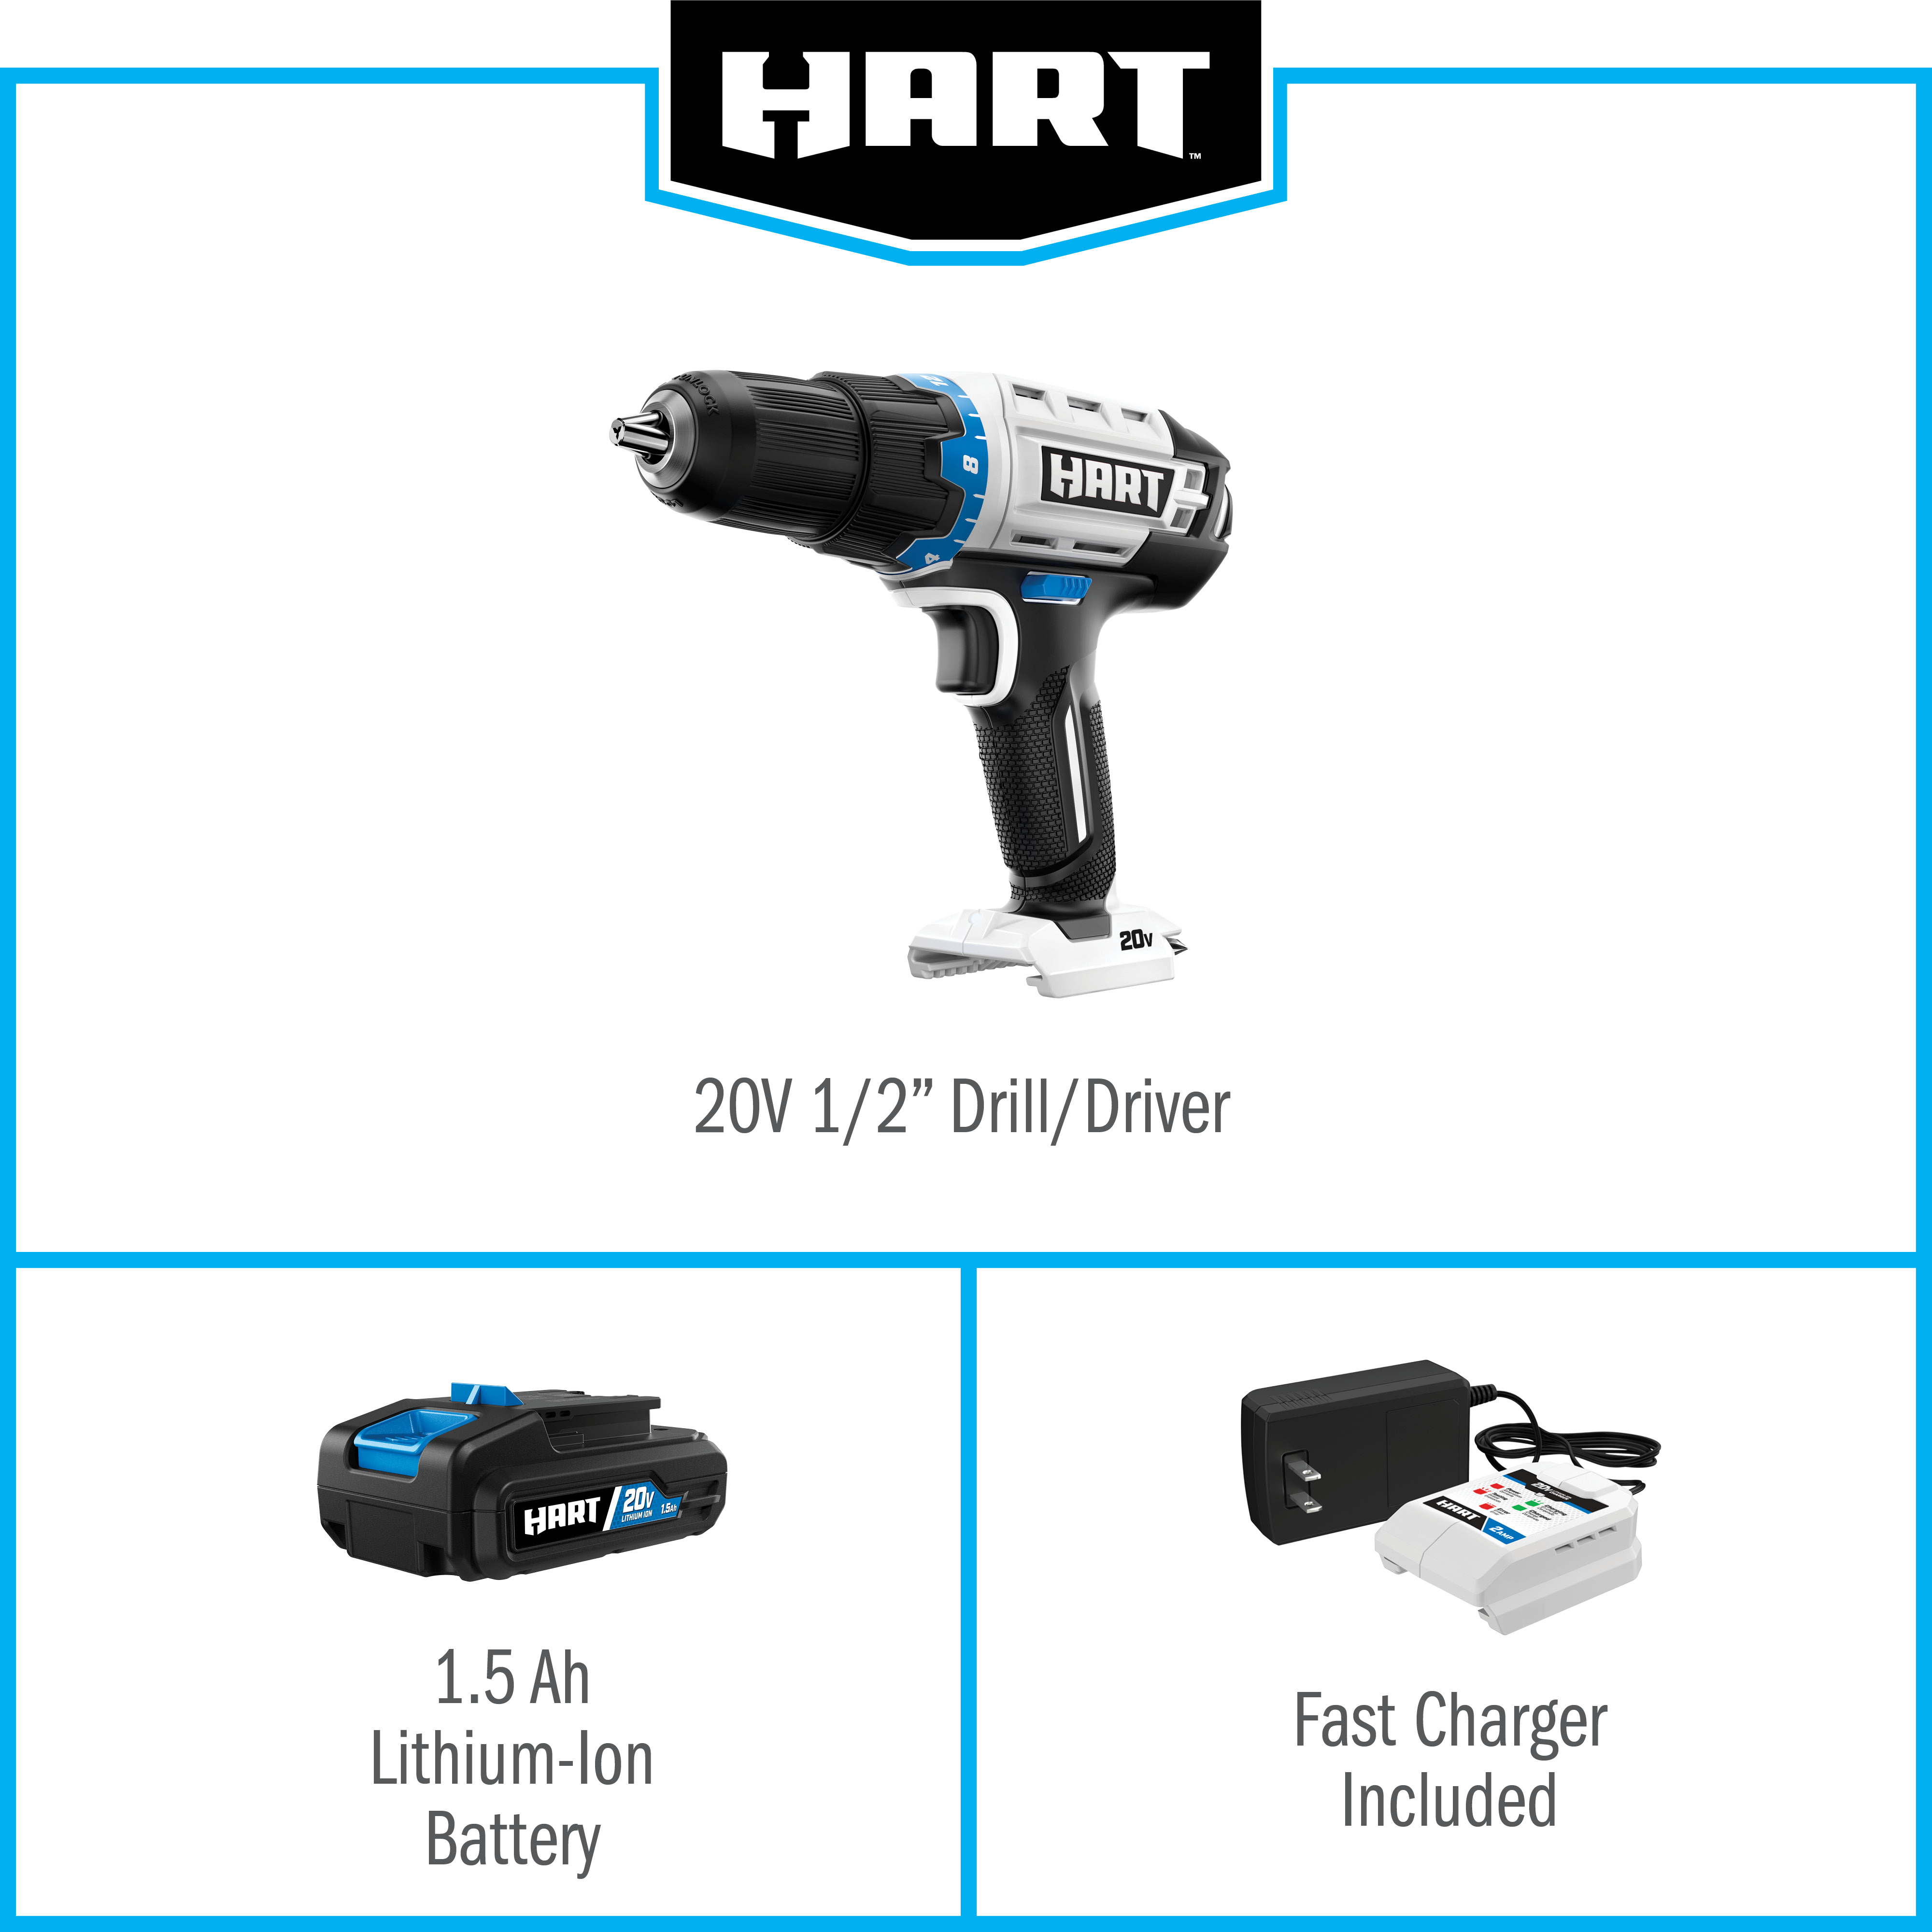 HART 20-Volt Cordless 1/2-inch Drill/Driver Kit (1) 1.5Ah Lithium-Ion Battery - image 3 of 17